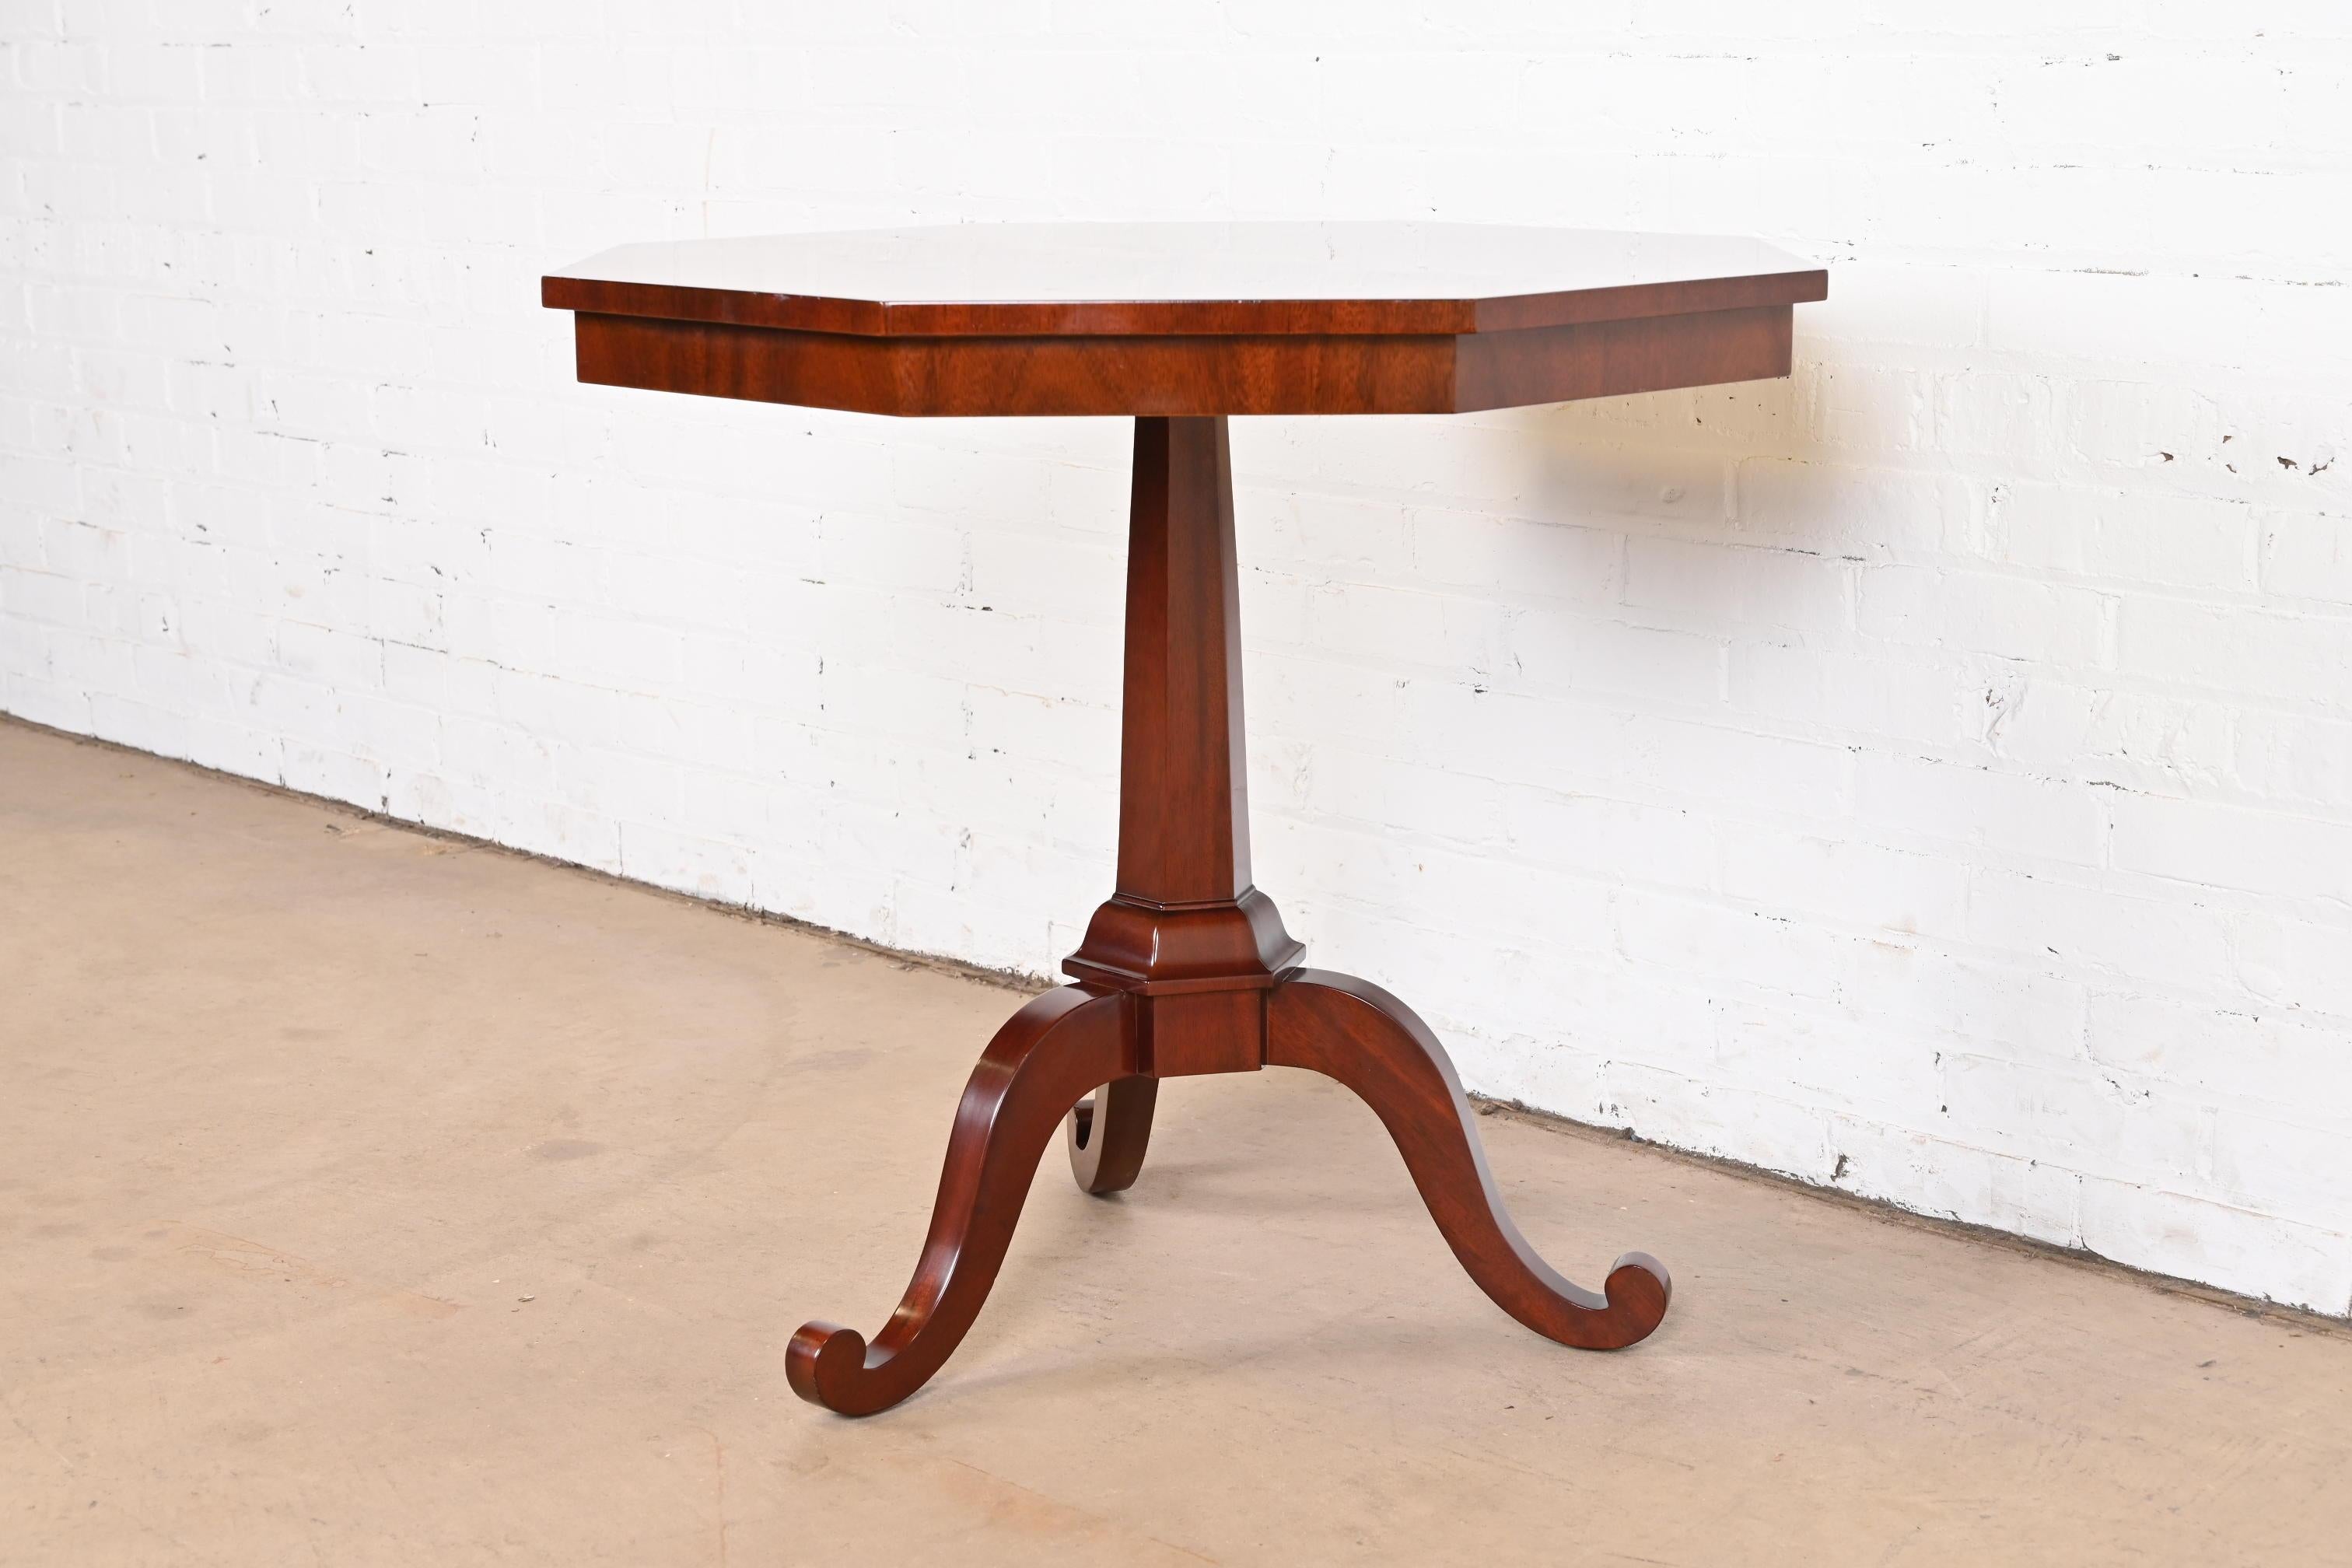 20th Century Kindel Furniture Regency Mahogany Inlaid Marquetry Pedestal Tea Table For Sale